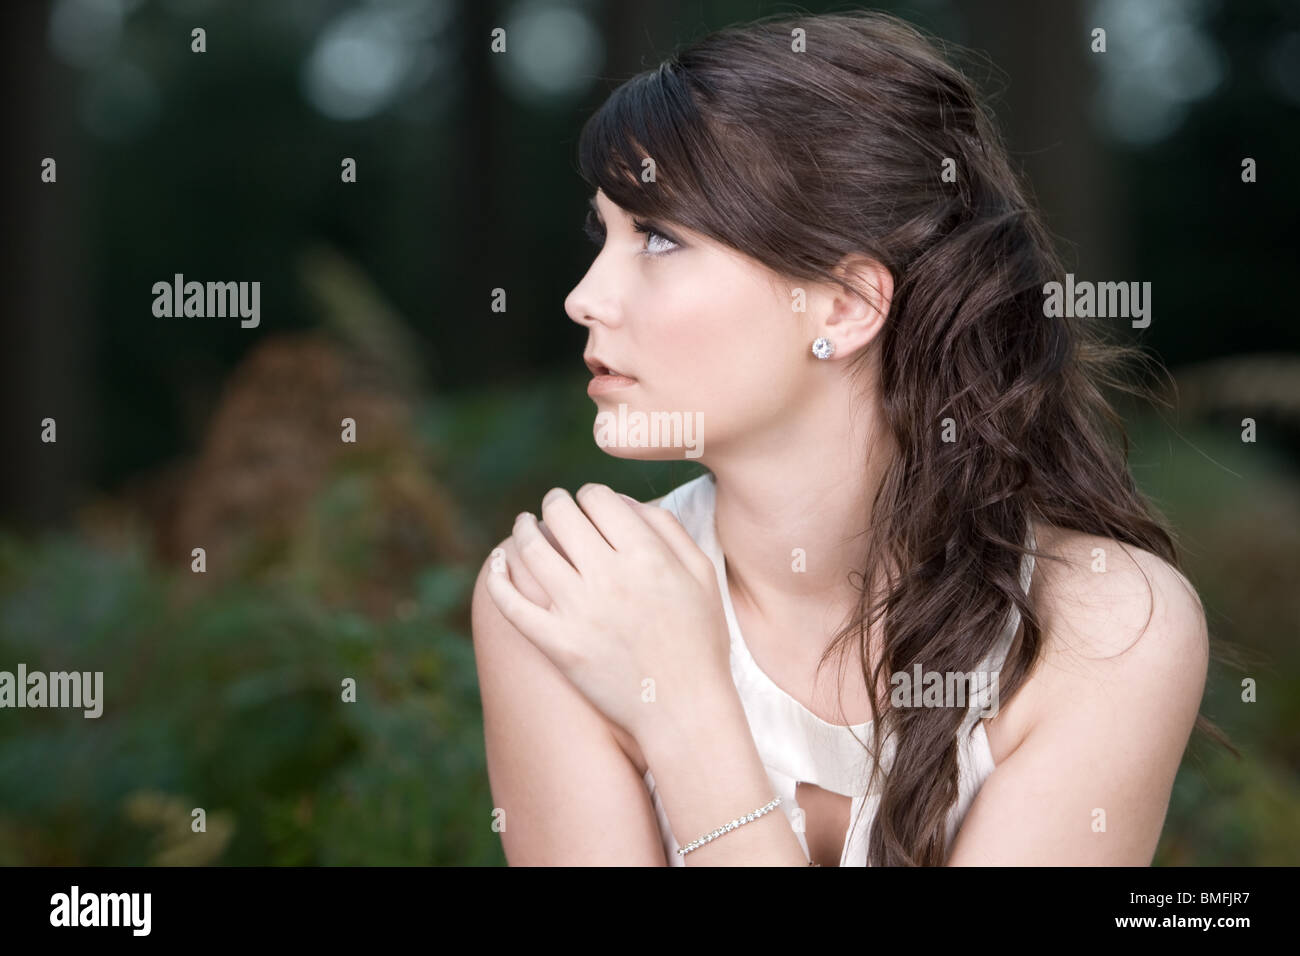 Teen Model High Resolution Stock Photography and Images - Alamy